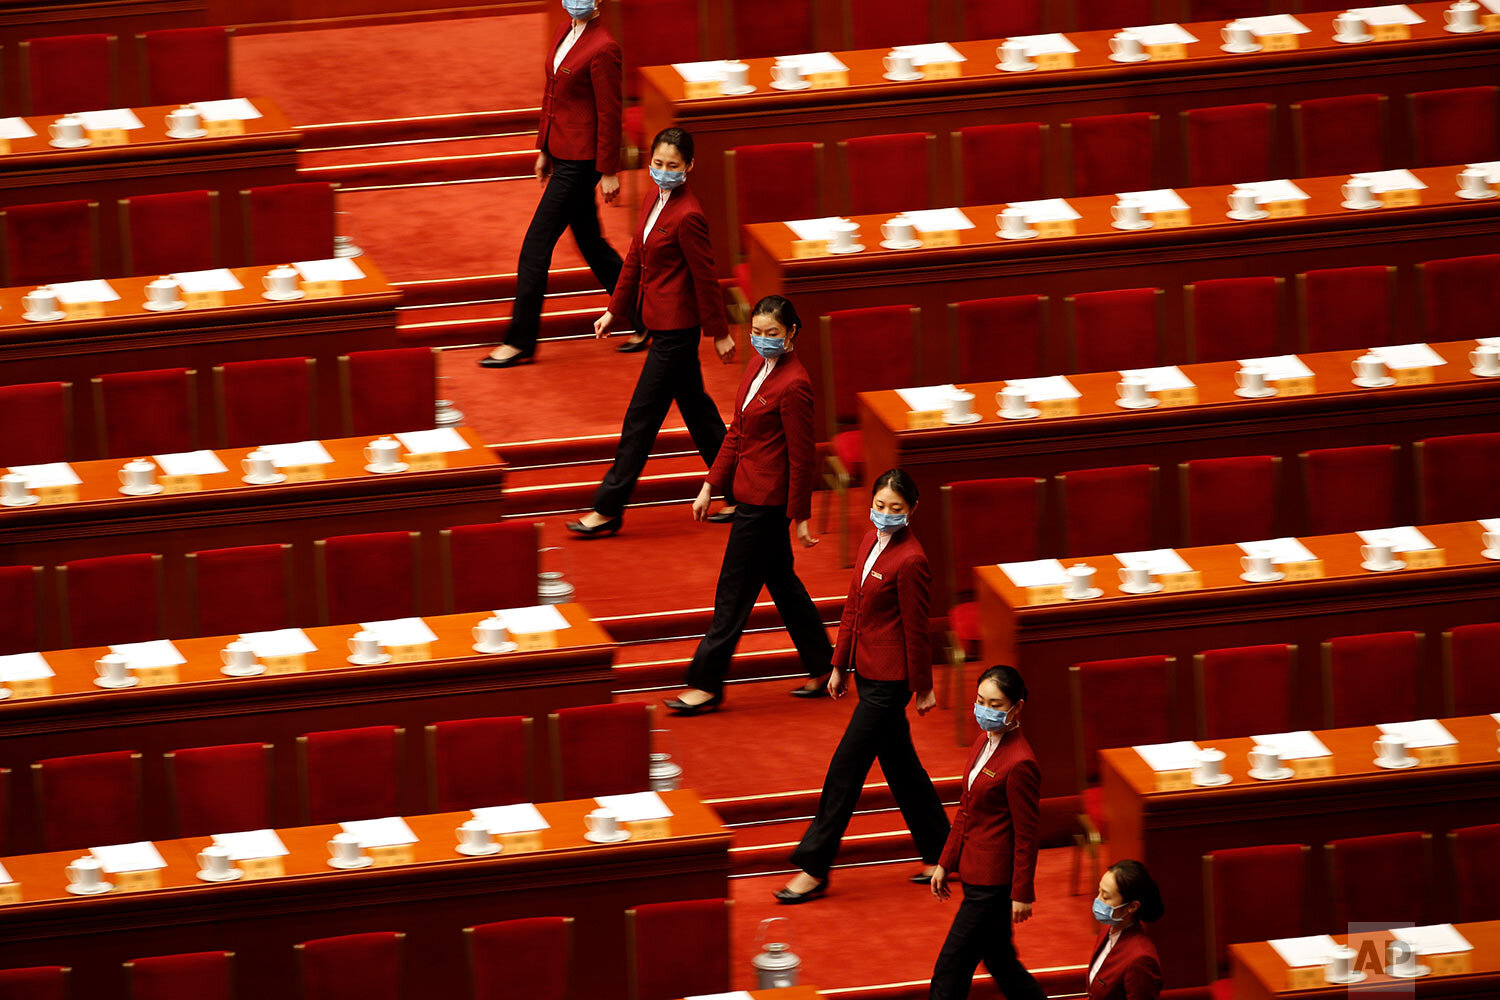  Tea hostesses prepare for the closing session of the Chinese People's Political Consultative Conference (CPPCC) at the Great Hall of the People in Beijing on Wednesday, May 27, 2020. (AP Photo/Andy Wong) 